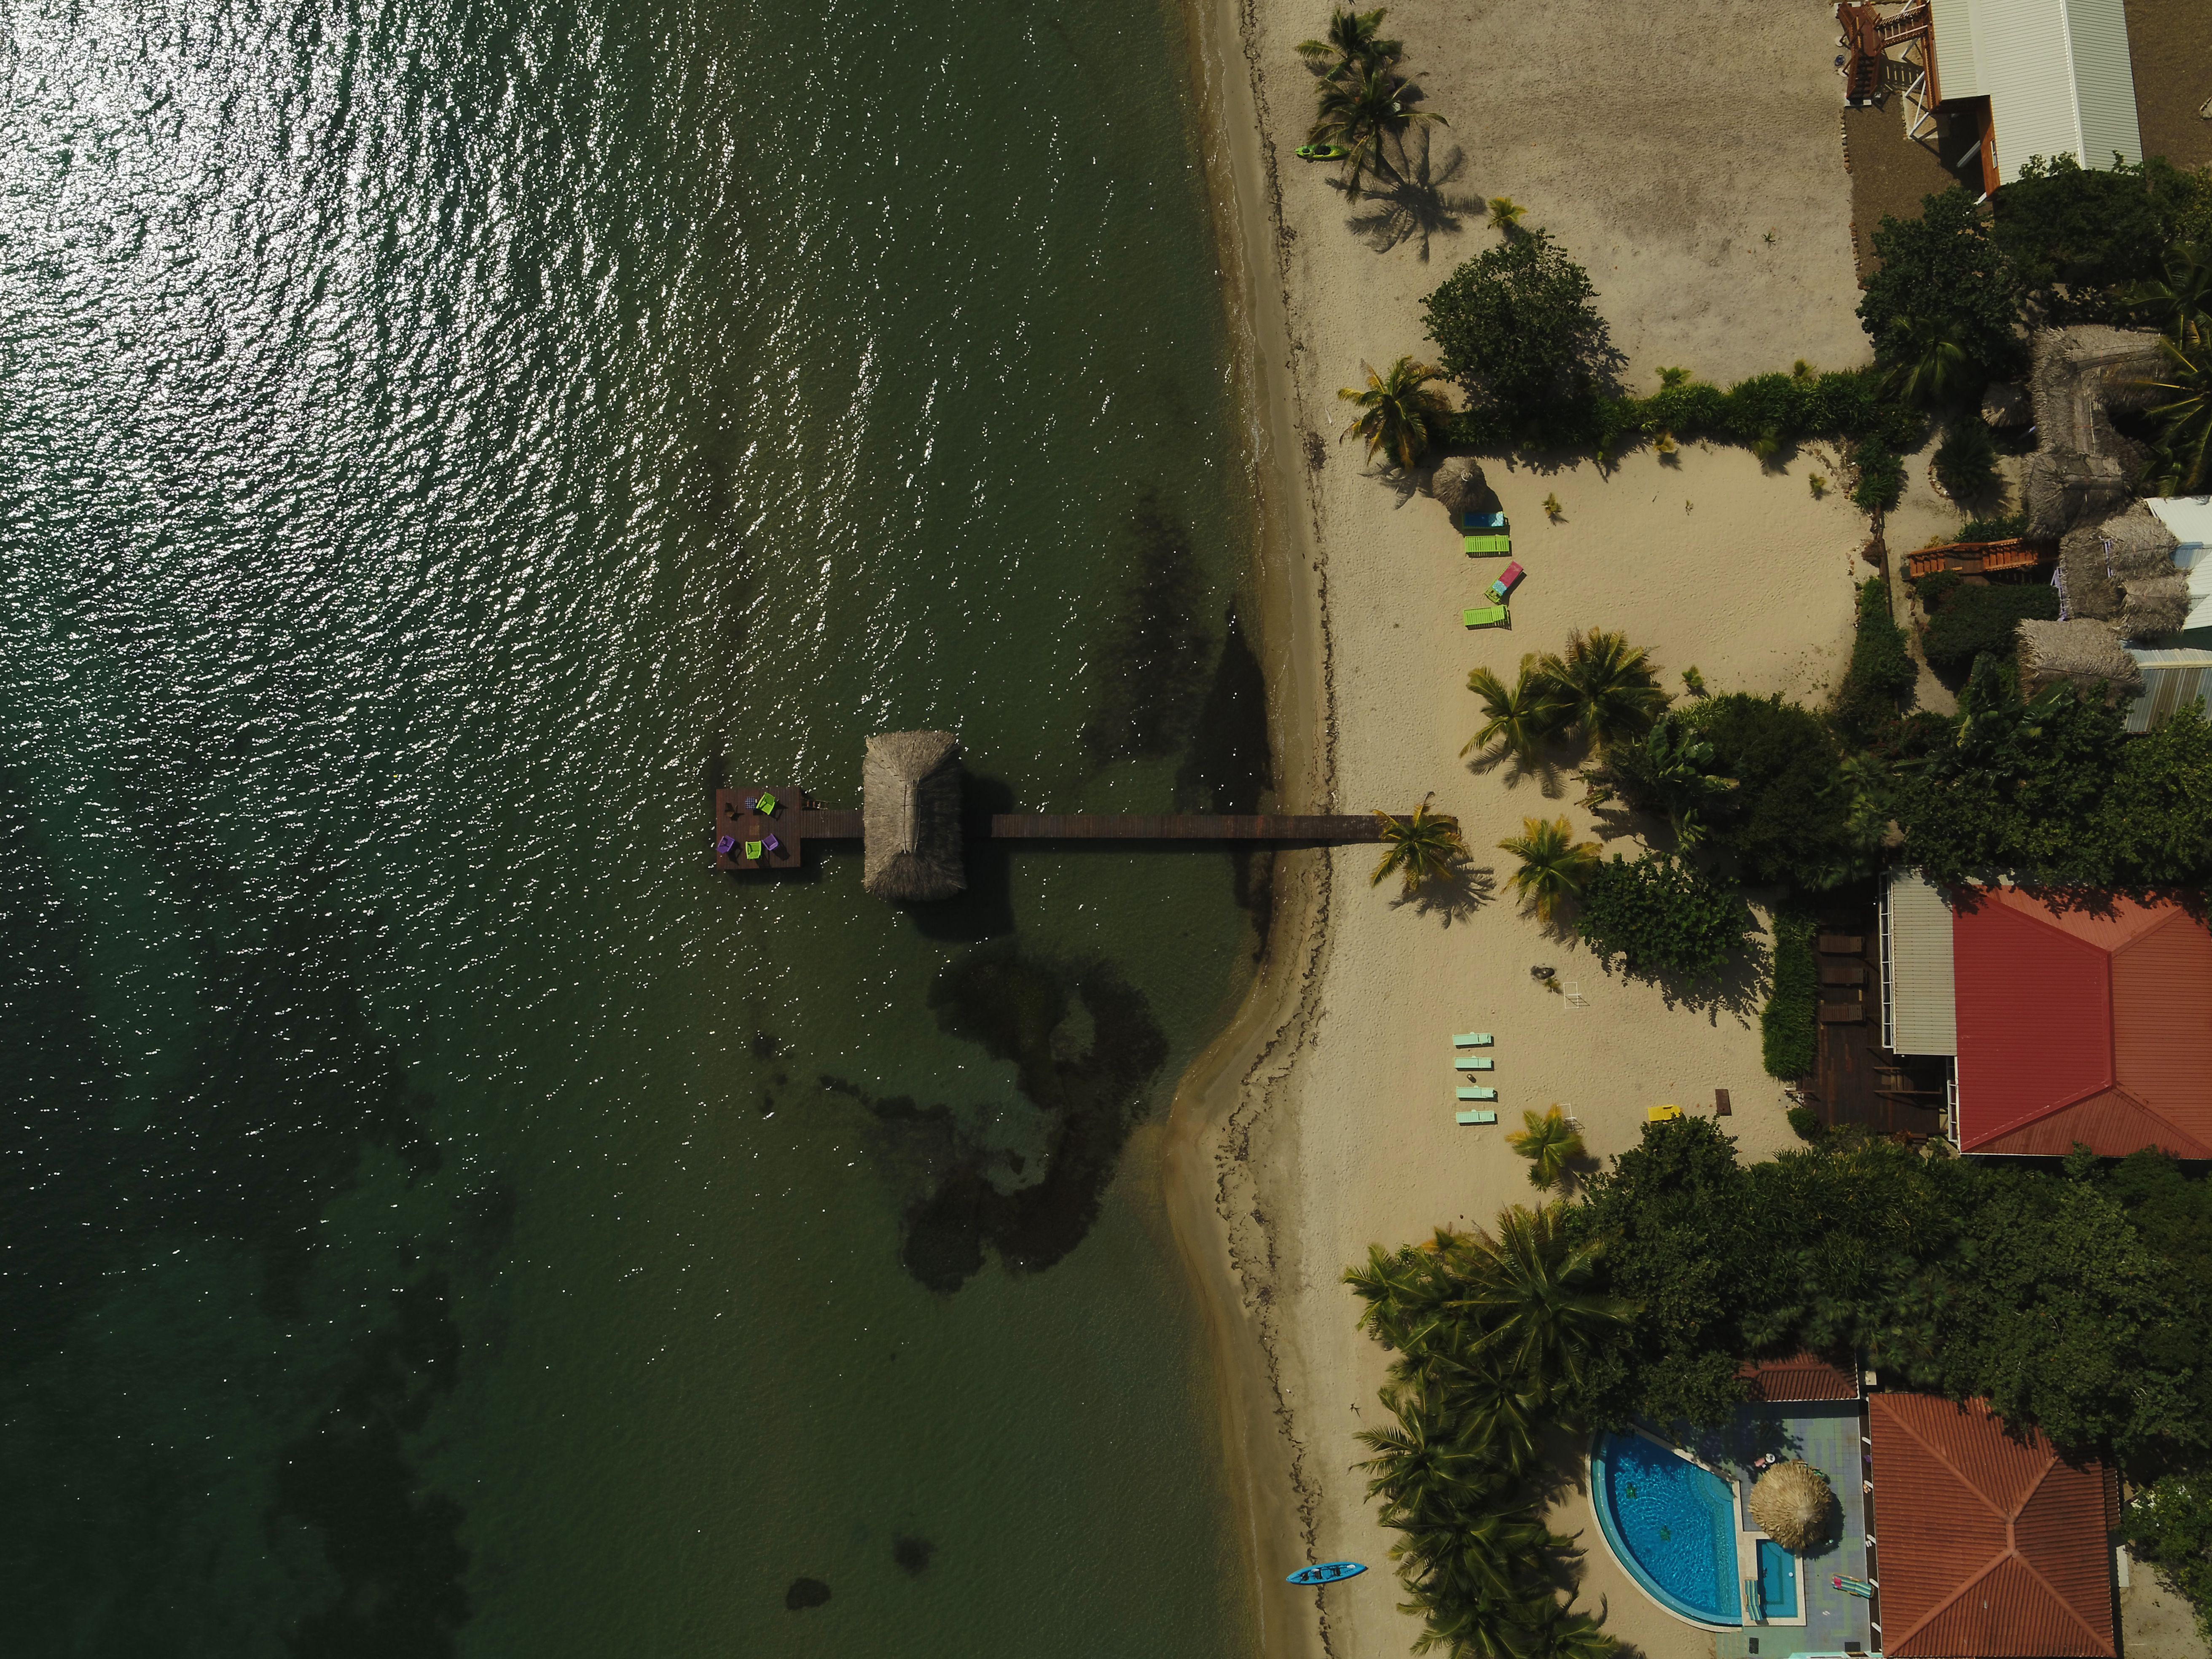 Drones are used to detect beach erosion